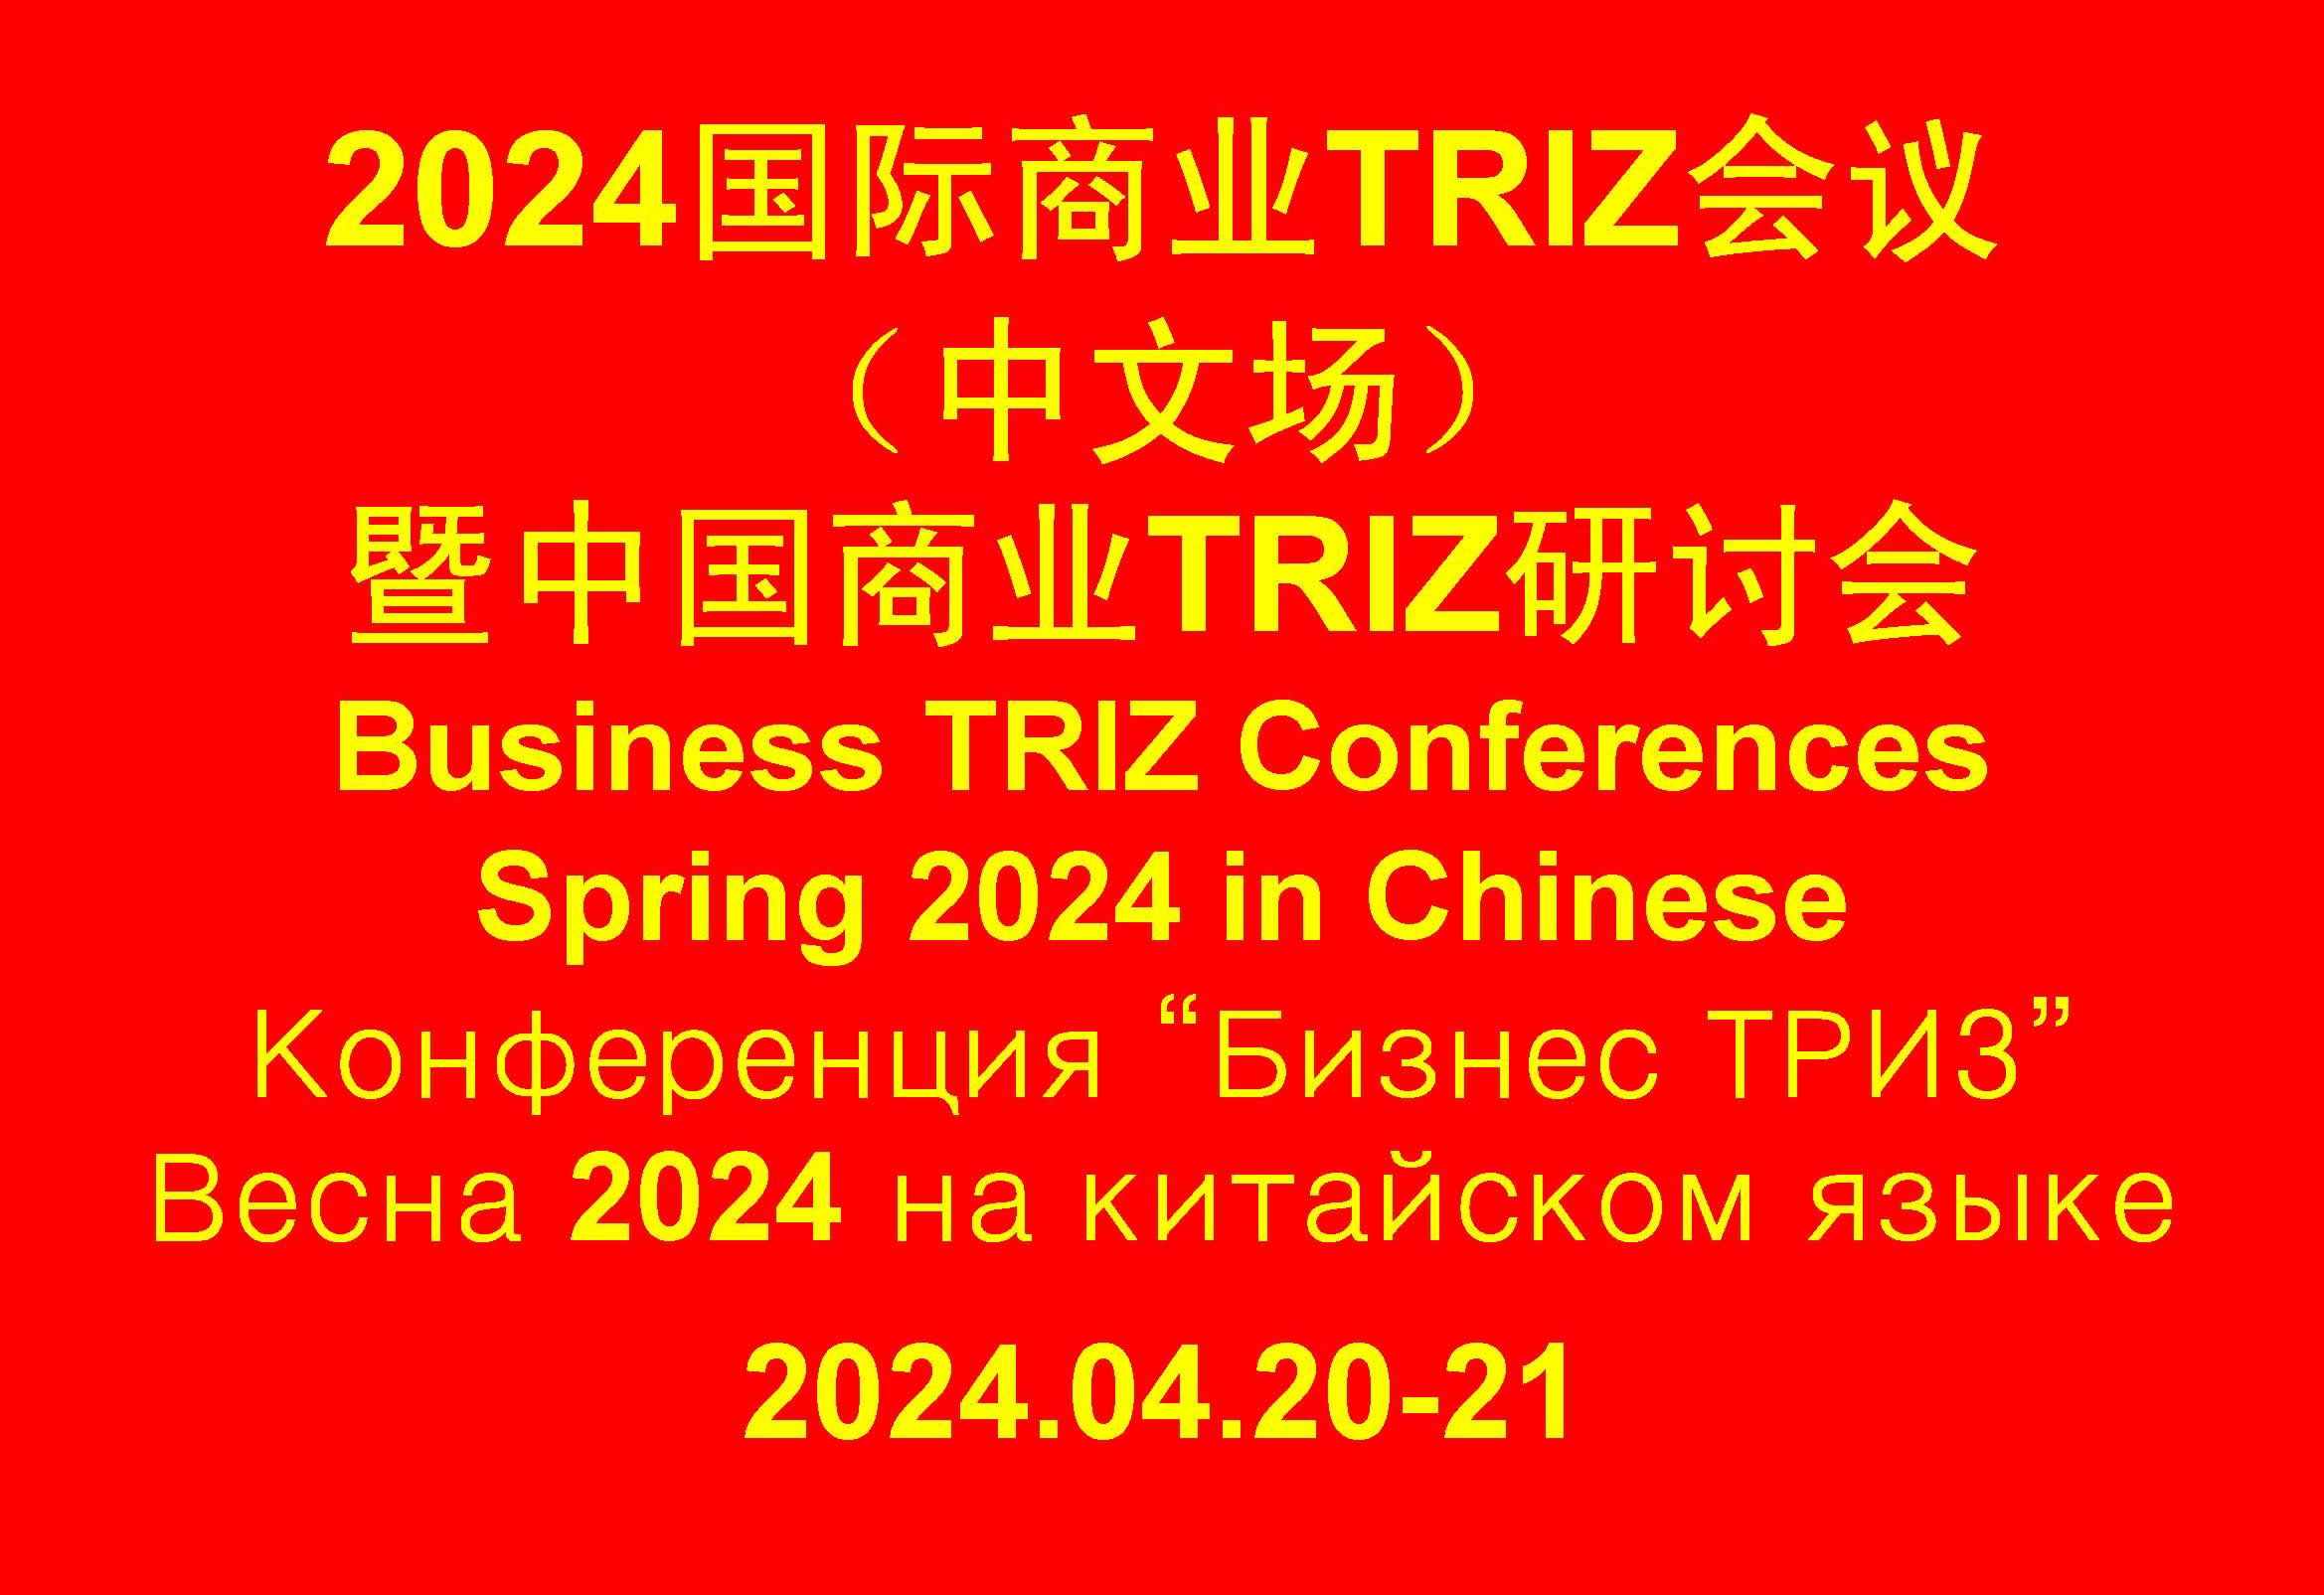  BUSINESS TRIZ CONFERENCE Spring 2024 (in Chinese)